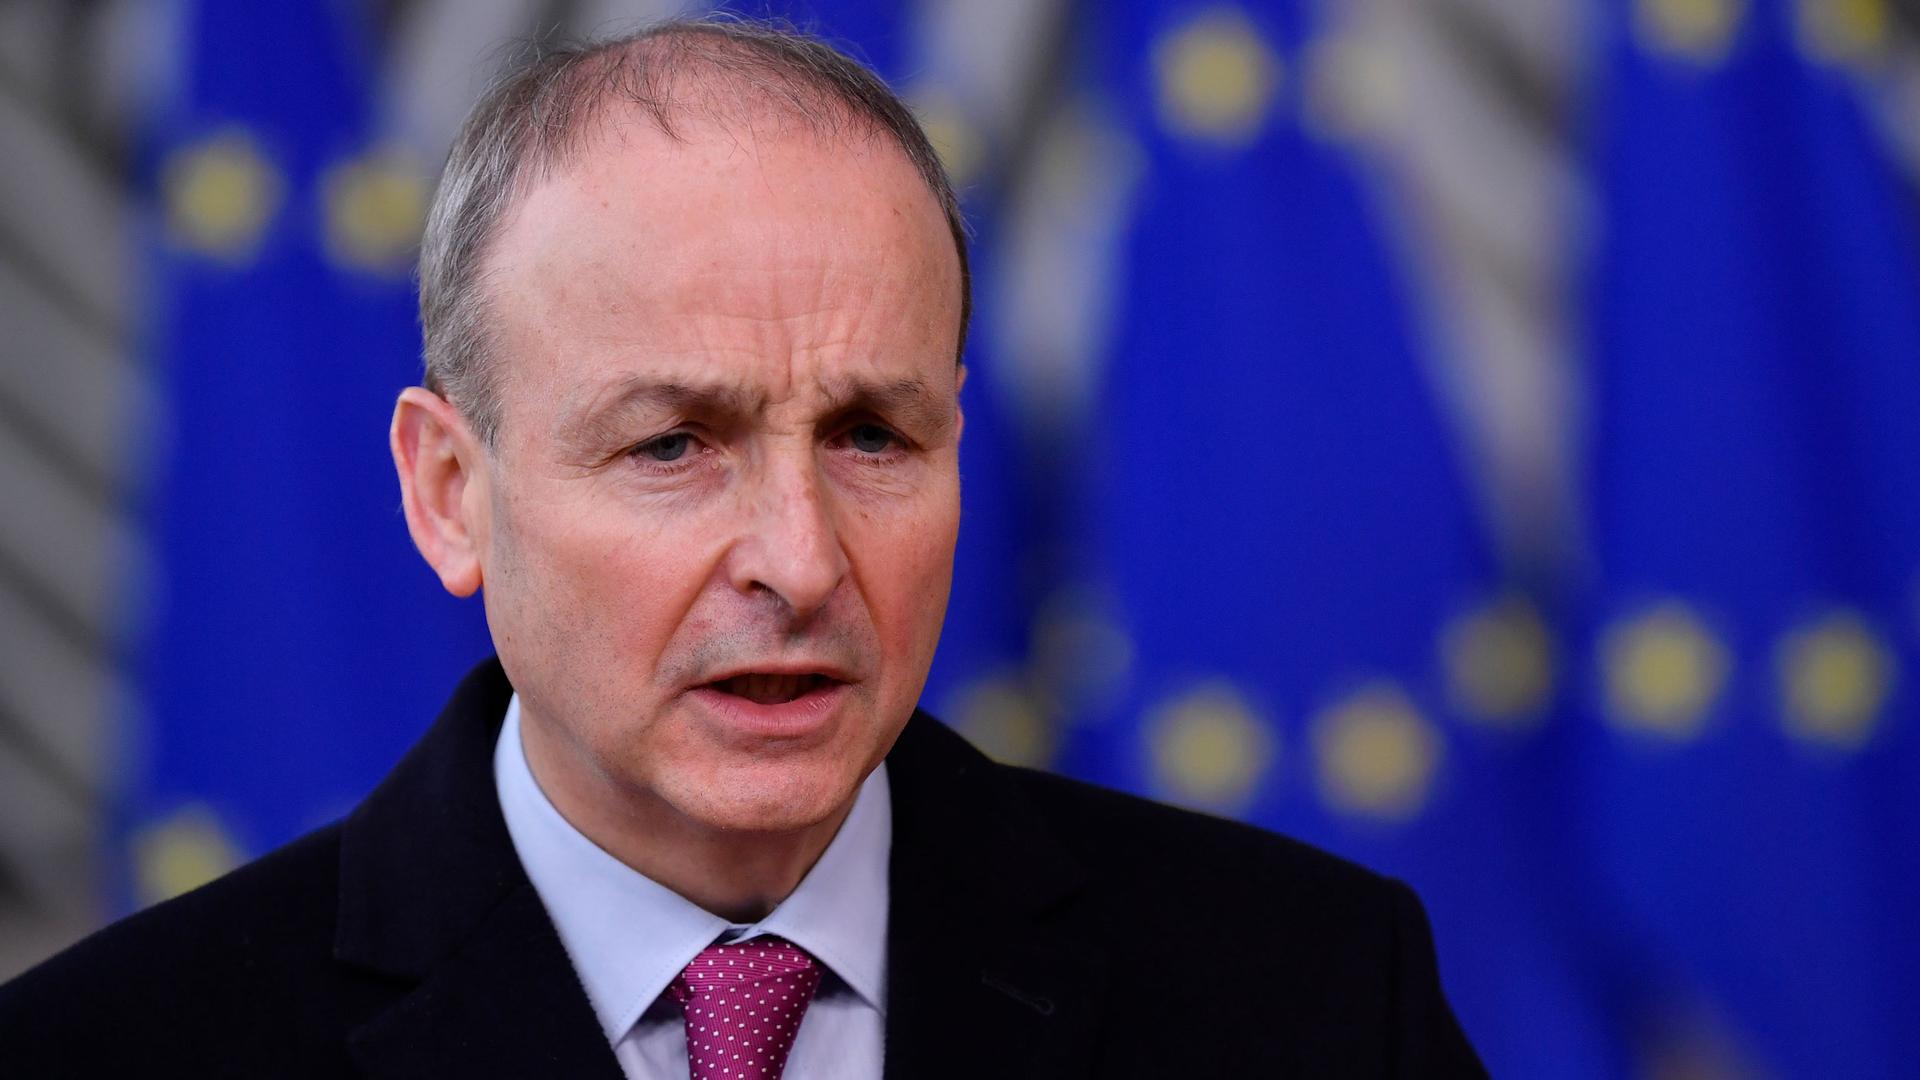 Ireland's Prime Minister Micheal Martin is shown wearing a dark suit jacket and red tie.